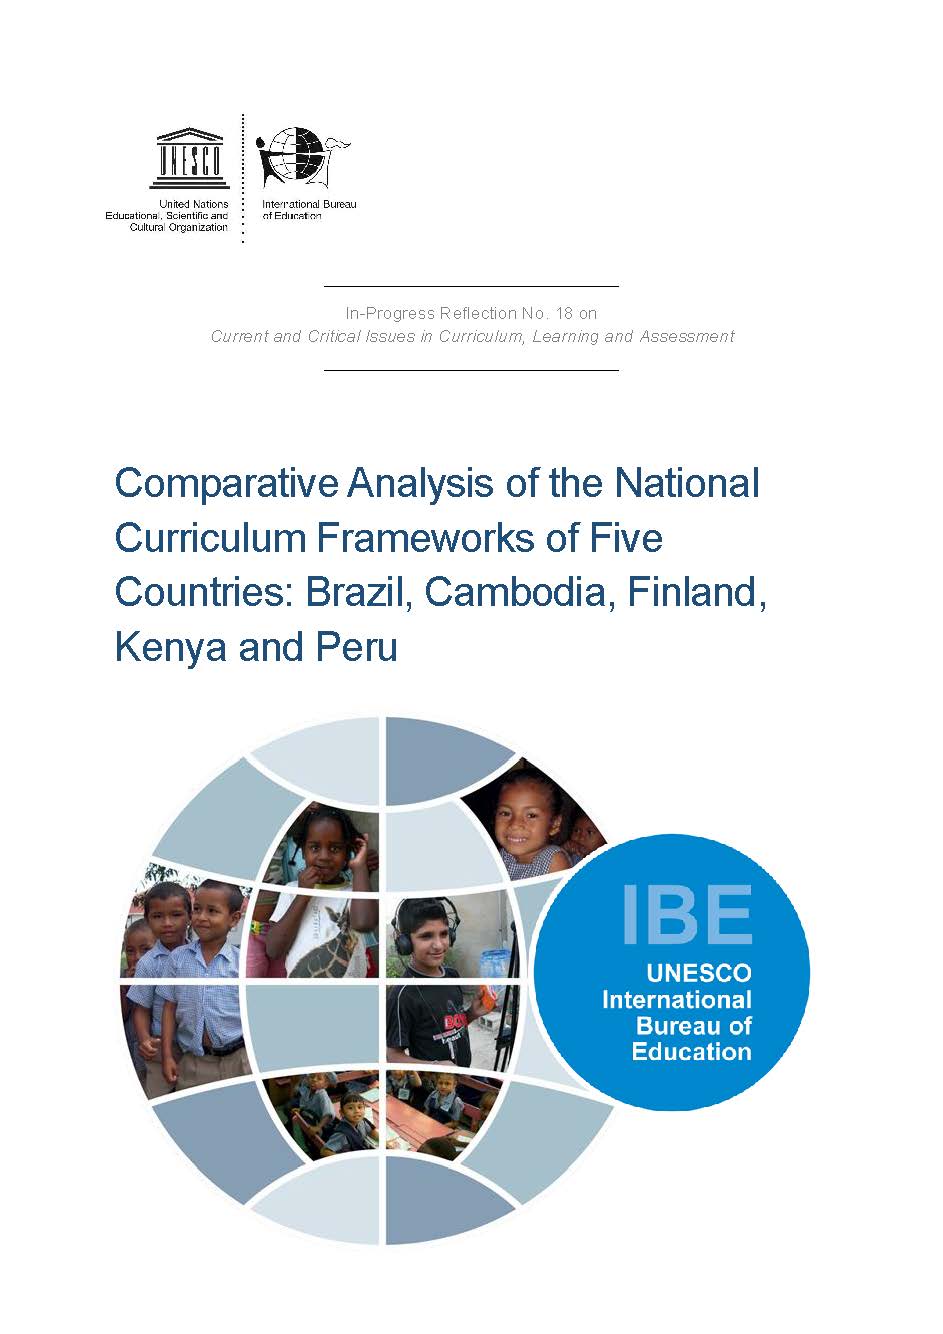 Comparative Analysis of the National Curriculum Frameworks of Five Countries Brazil, Cambodia, Finland, Kenya and Peru